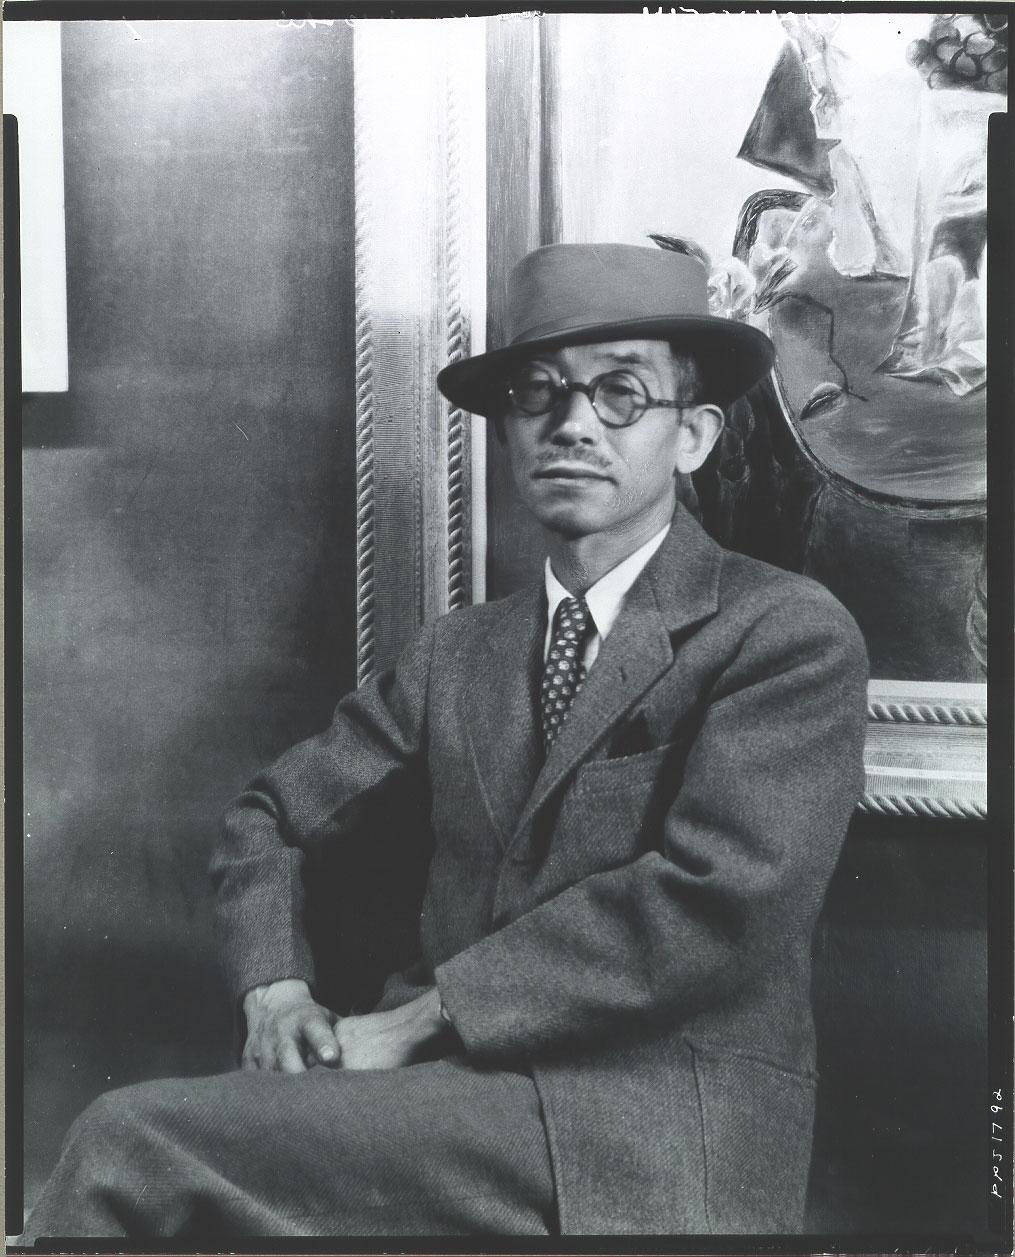 A picture of Yasuo Kuniyoshi in a suit and hat sitting in front of artwork.